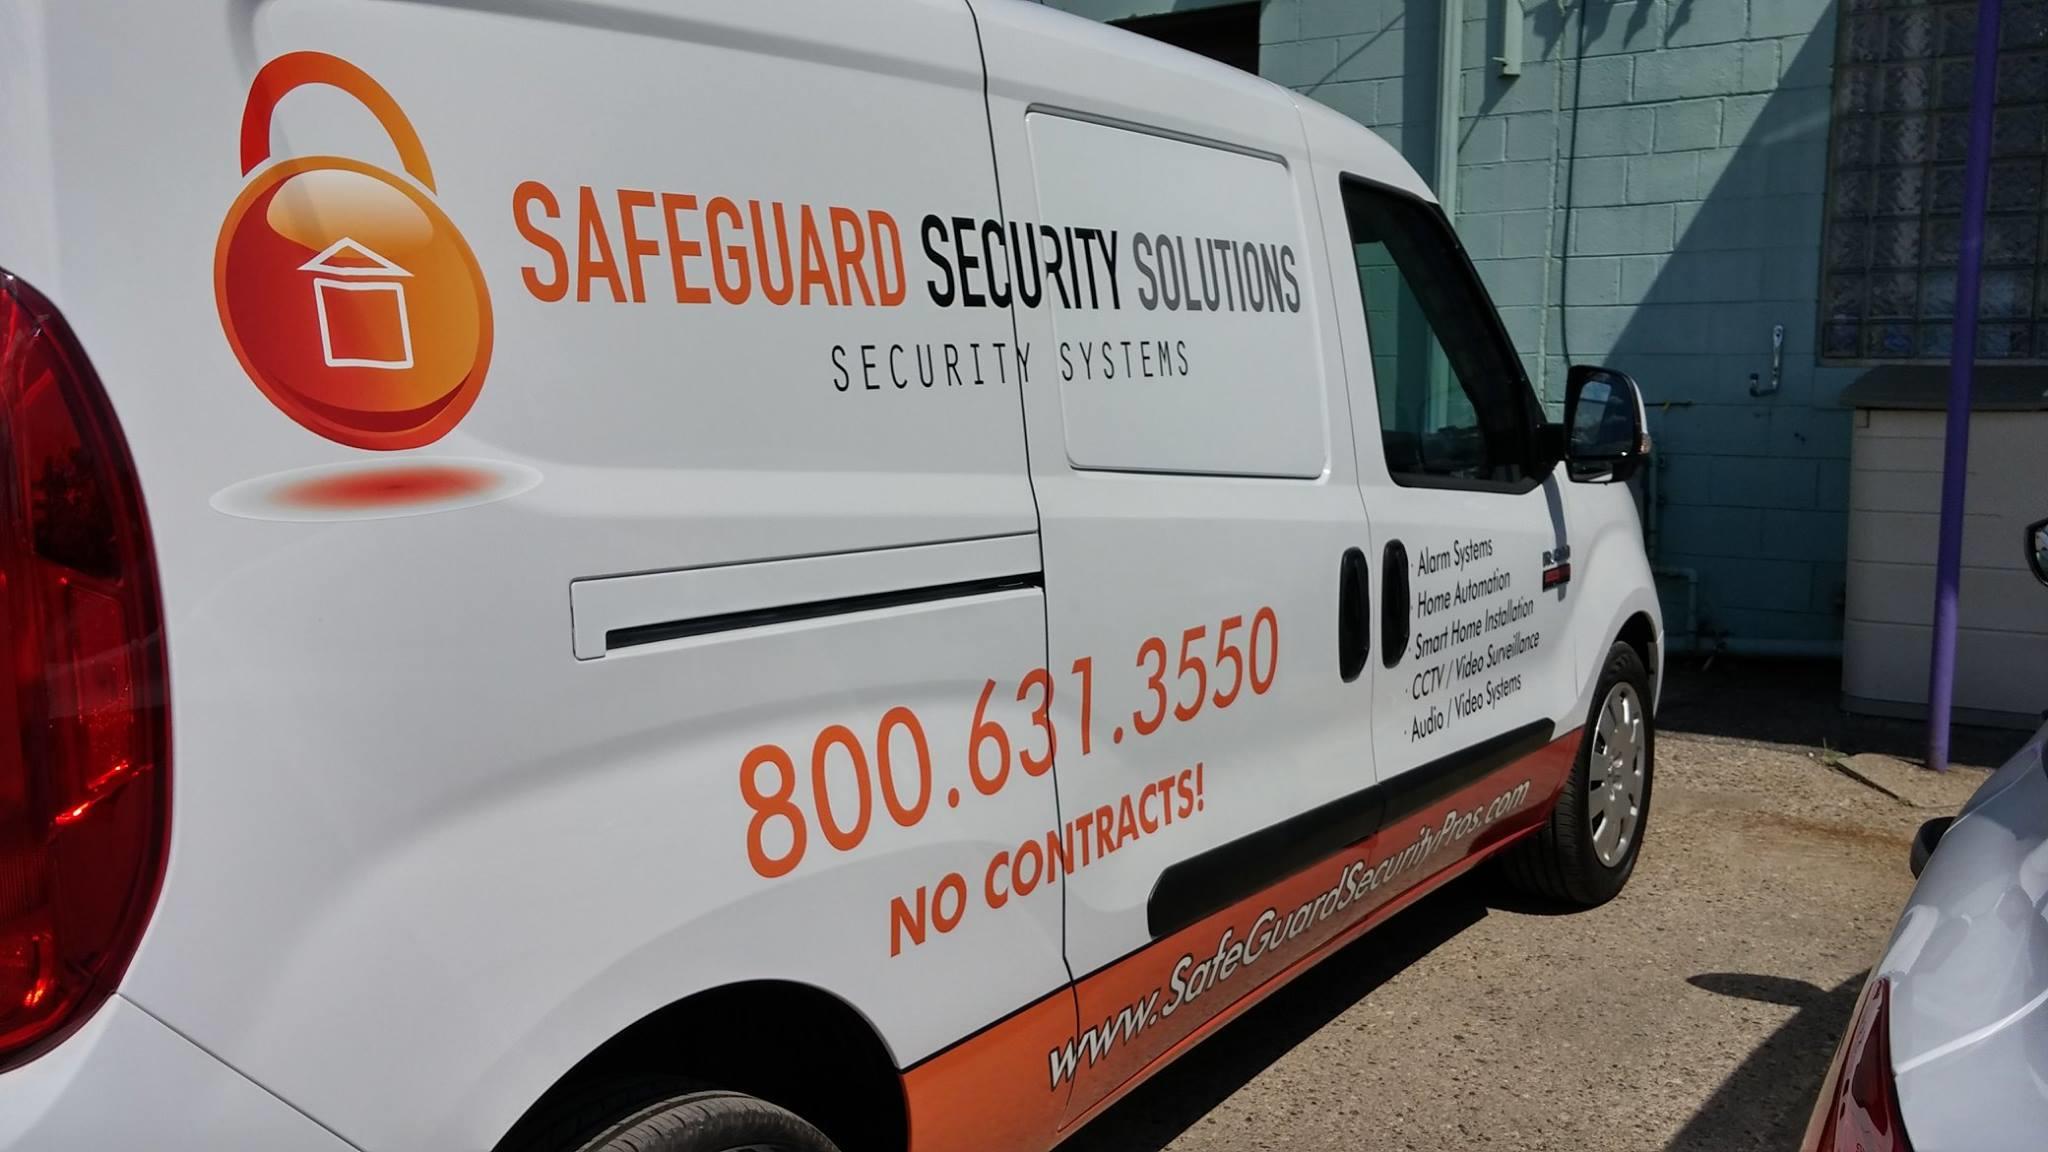 Safeguard Security Solutions Photo